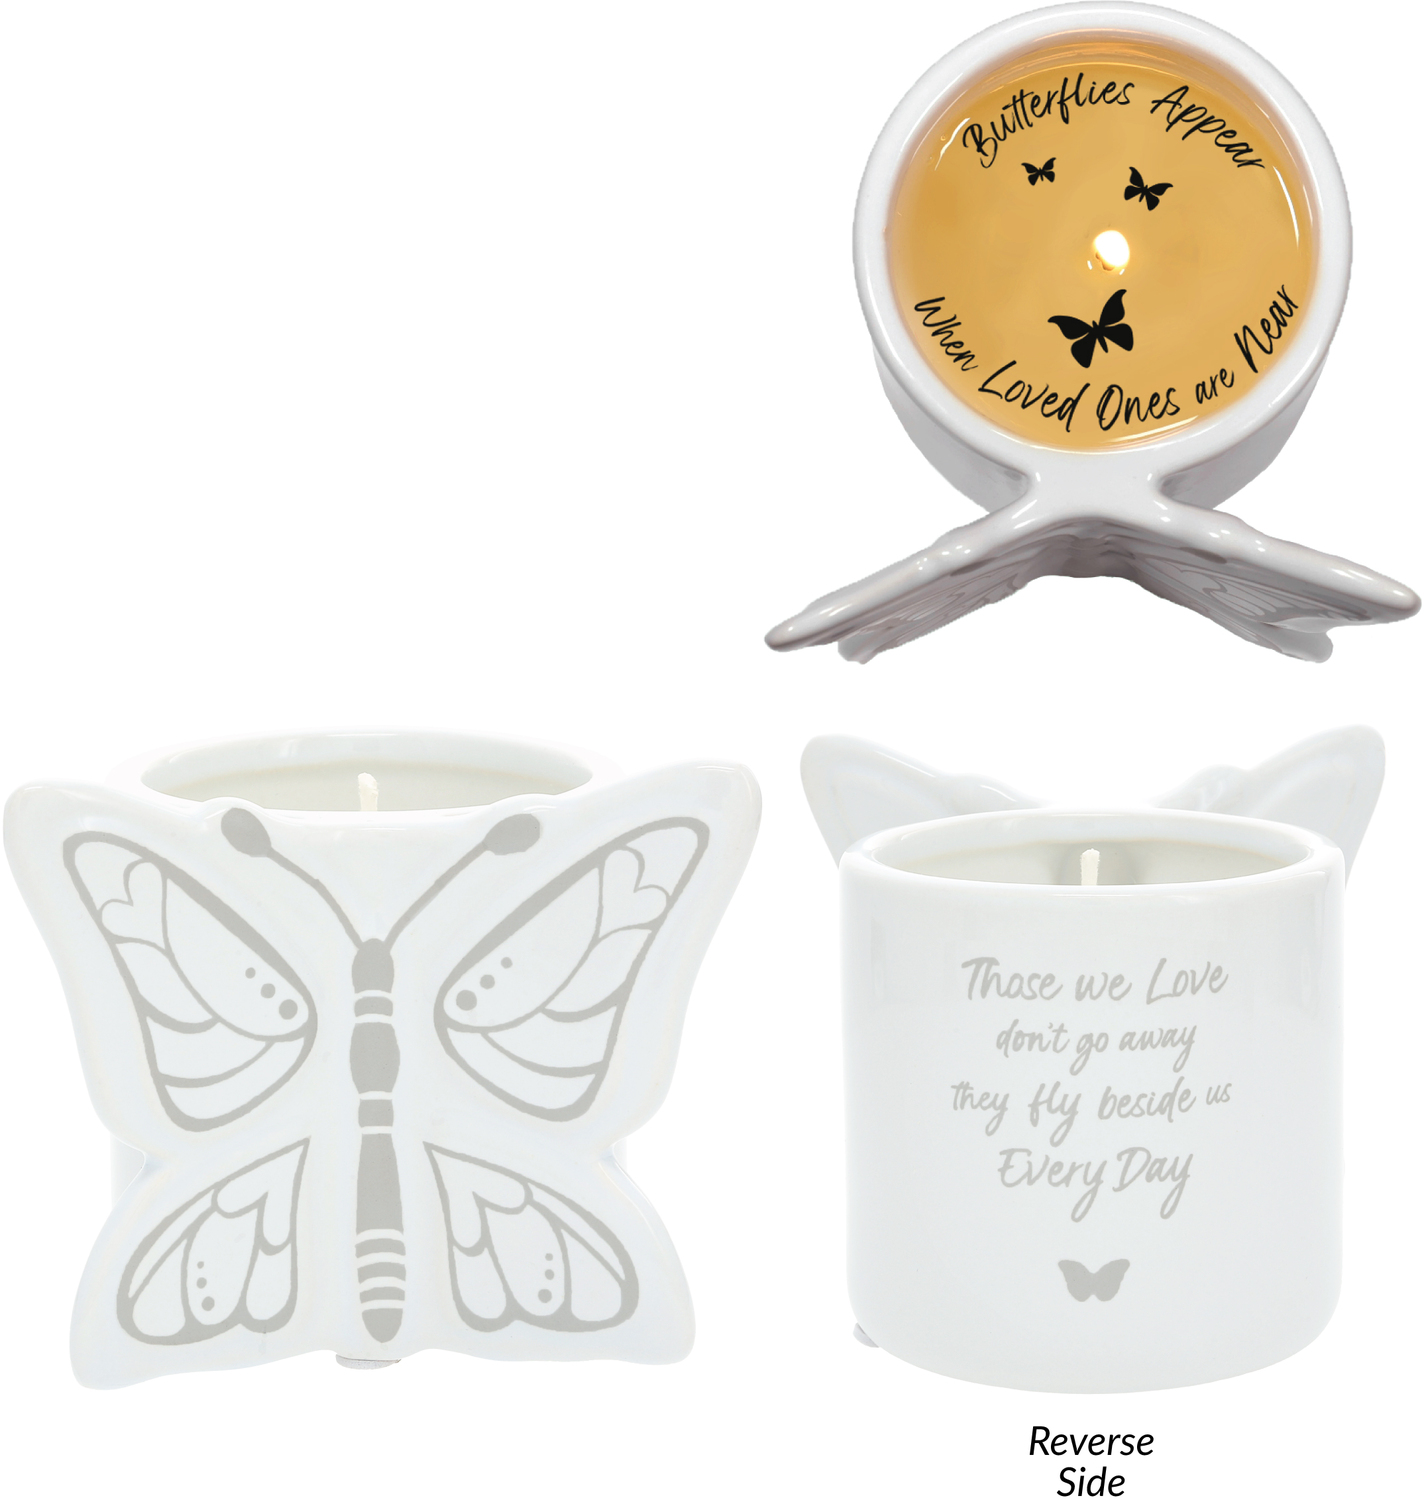 Beside Us by Forever in our Hearts - Beside Us - 8 oz 100% Soy Wax Reveal Butterfly Candle
Scent: Tranquility